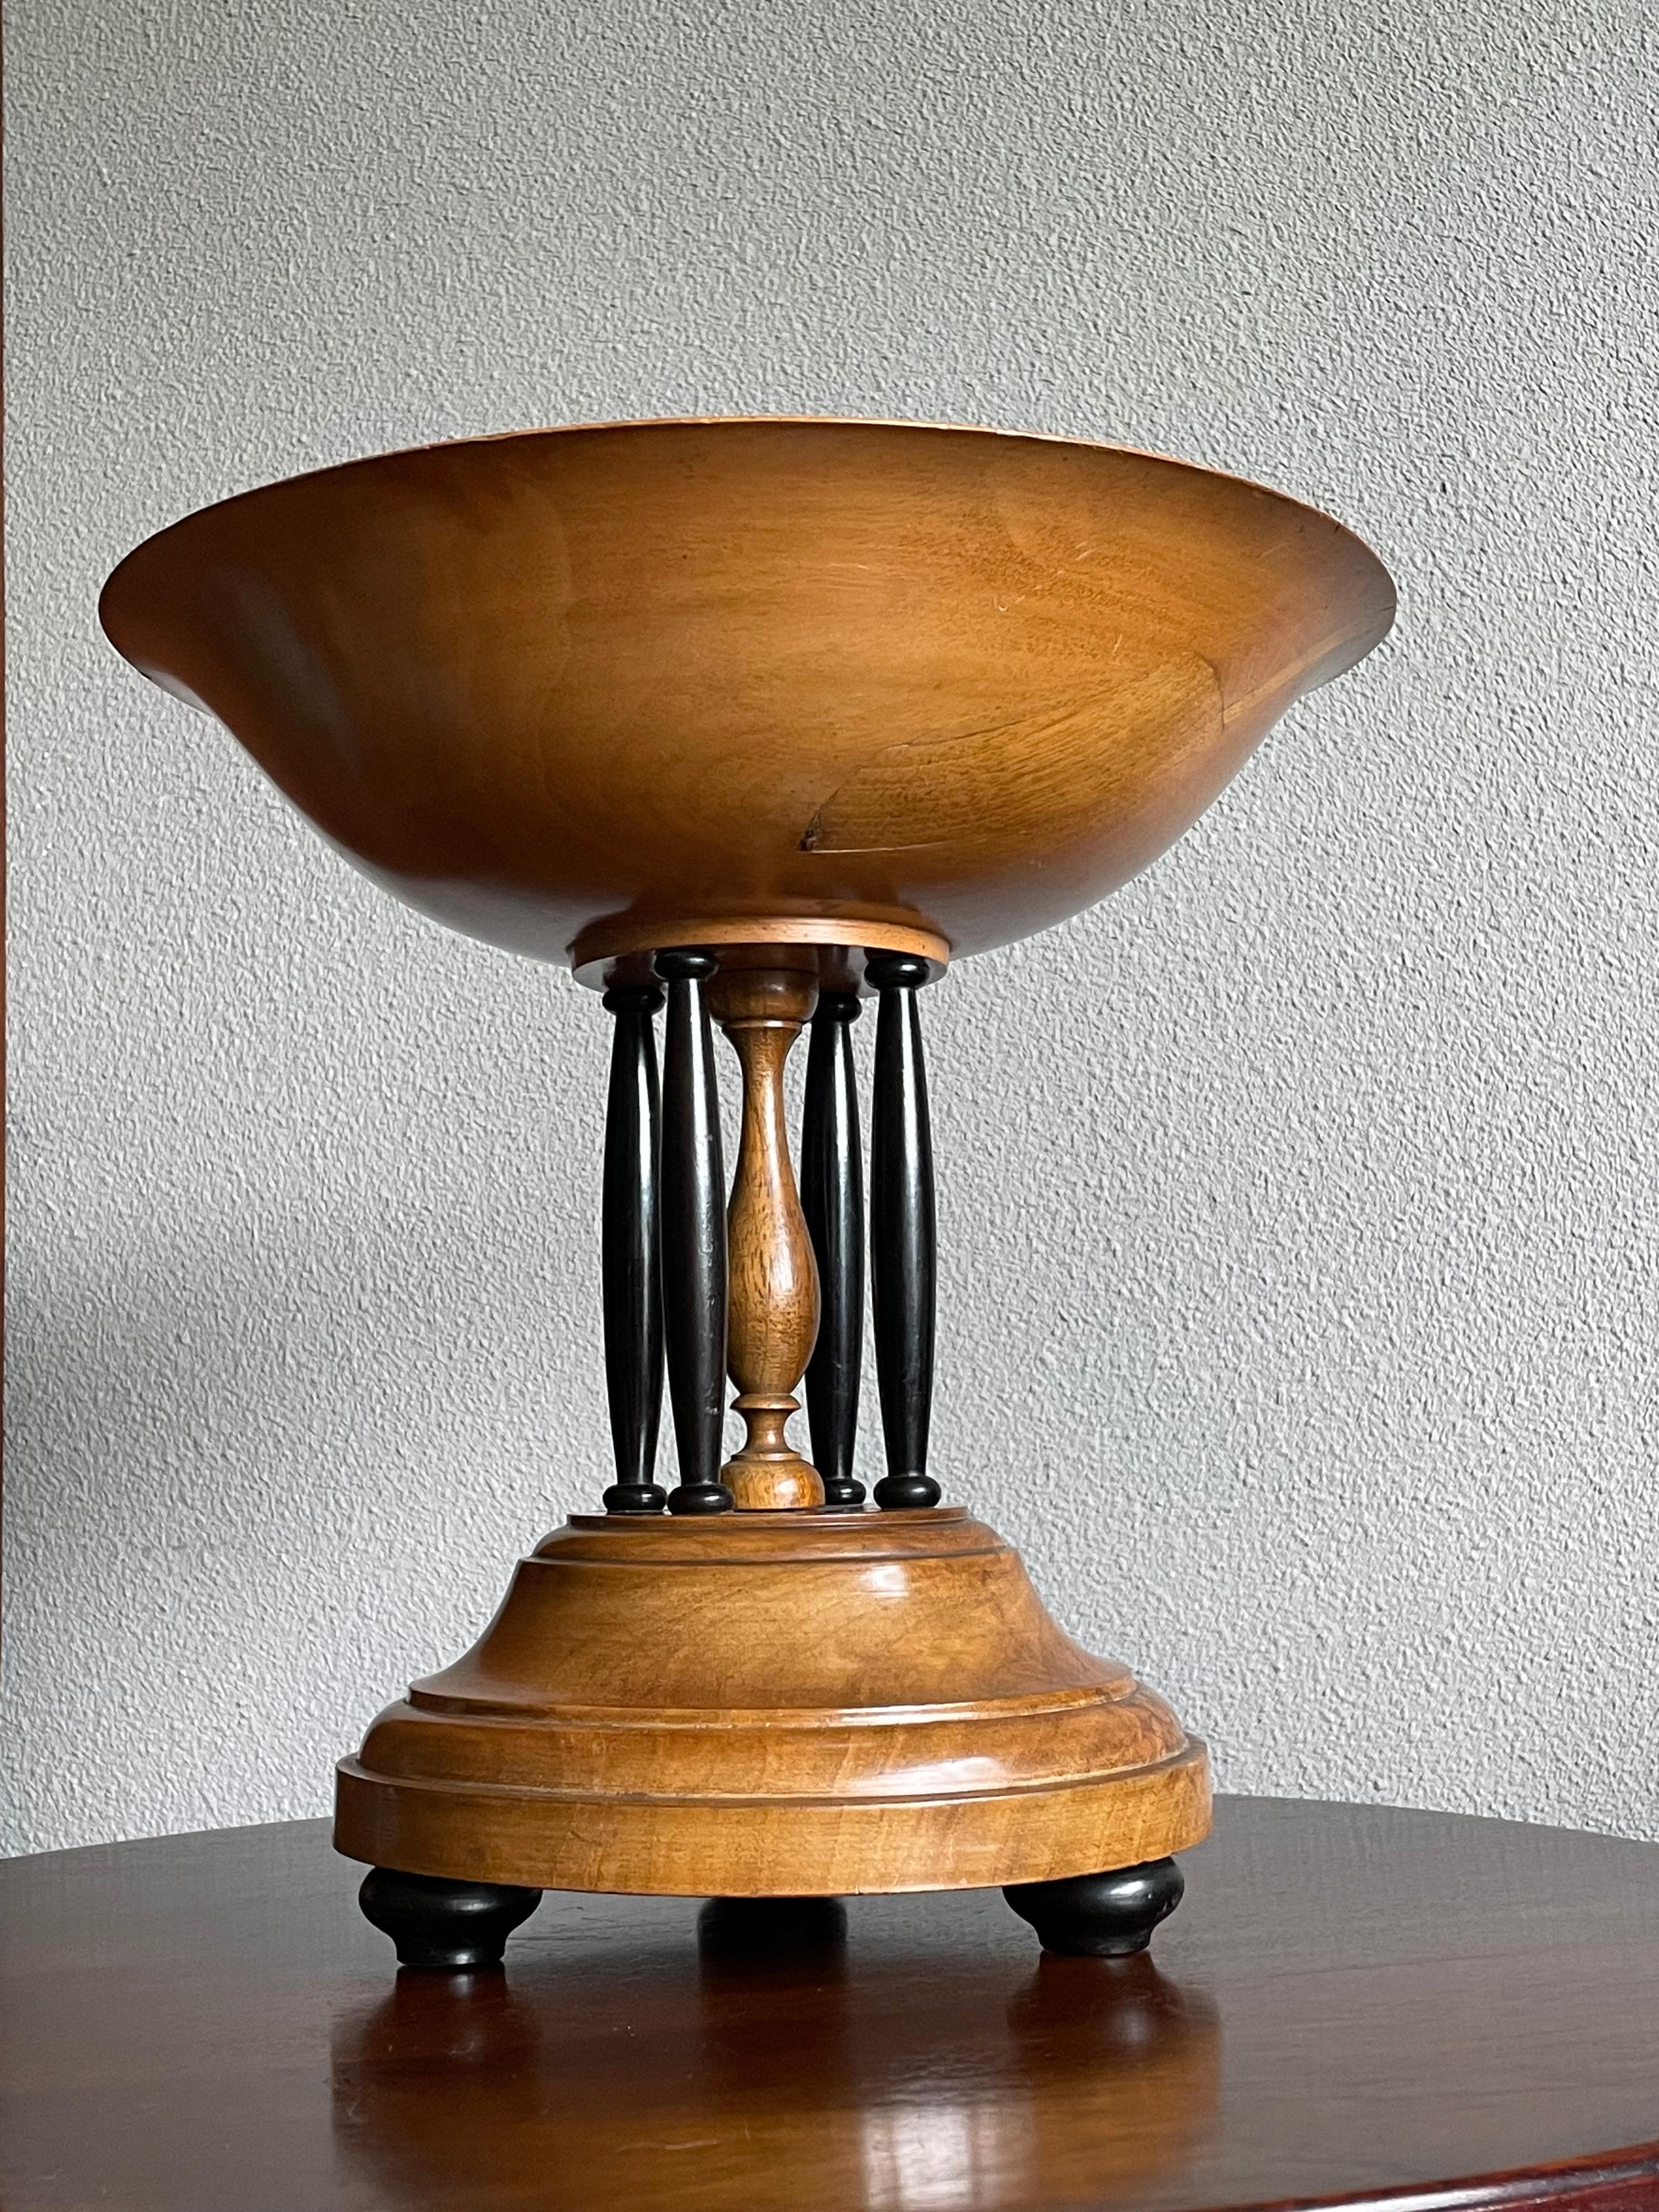 Antique and All Handcrafted 19th Century Wooden Fruitbowl / Center Table Piece 4